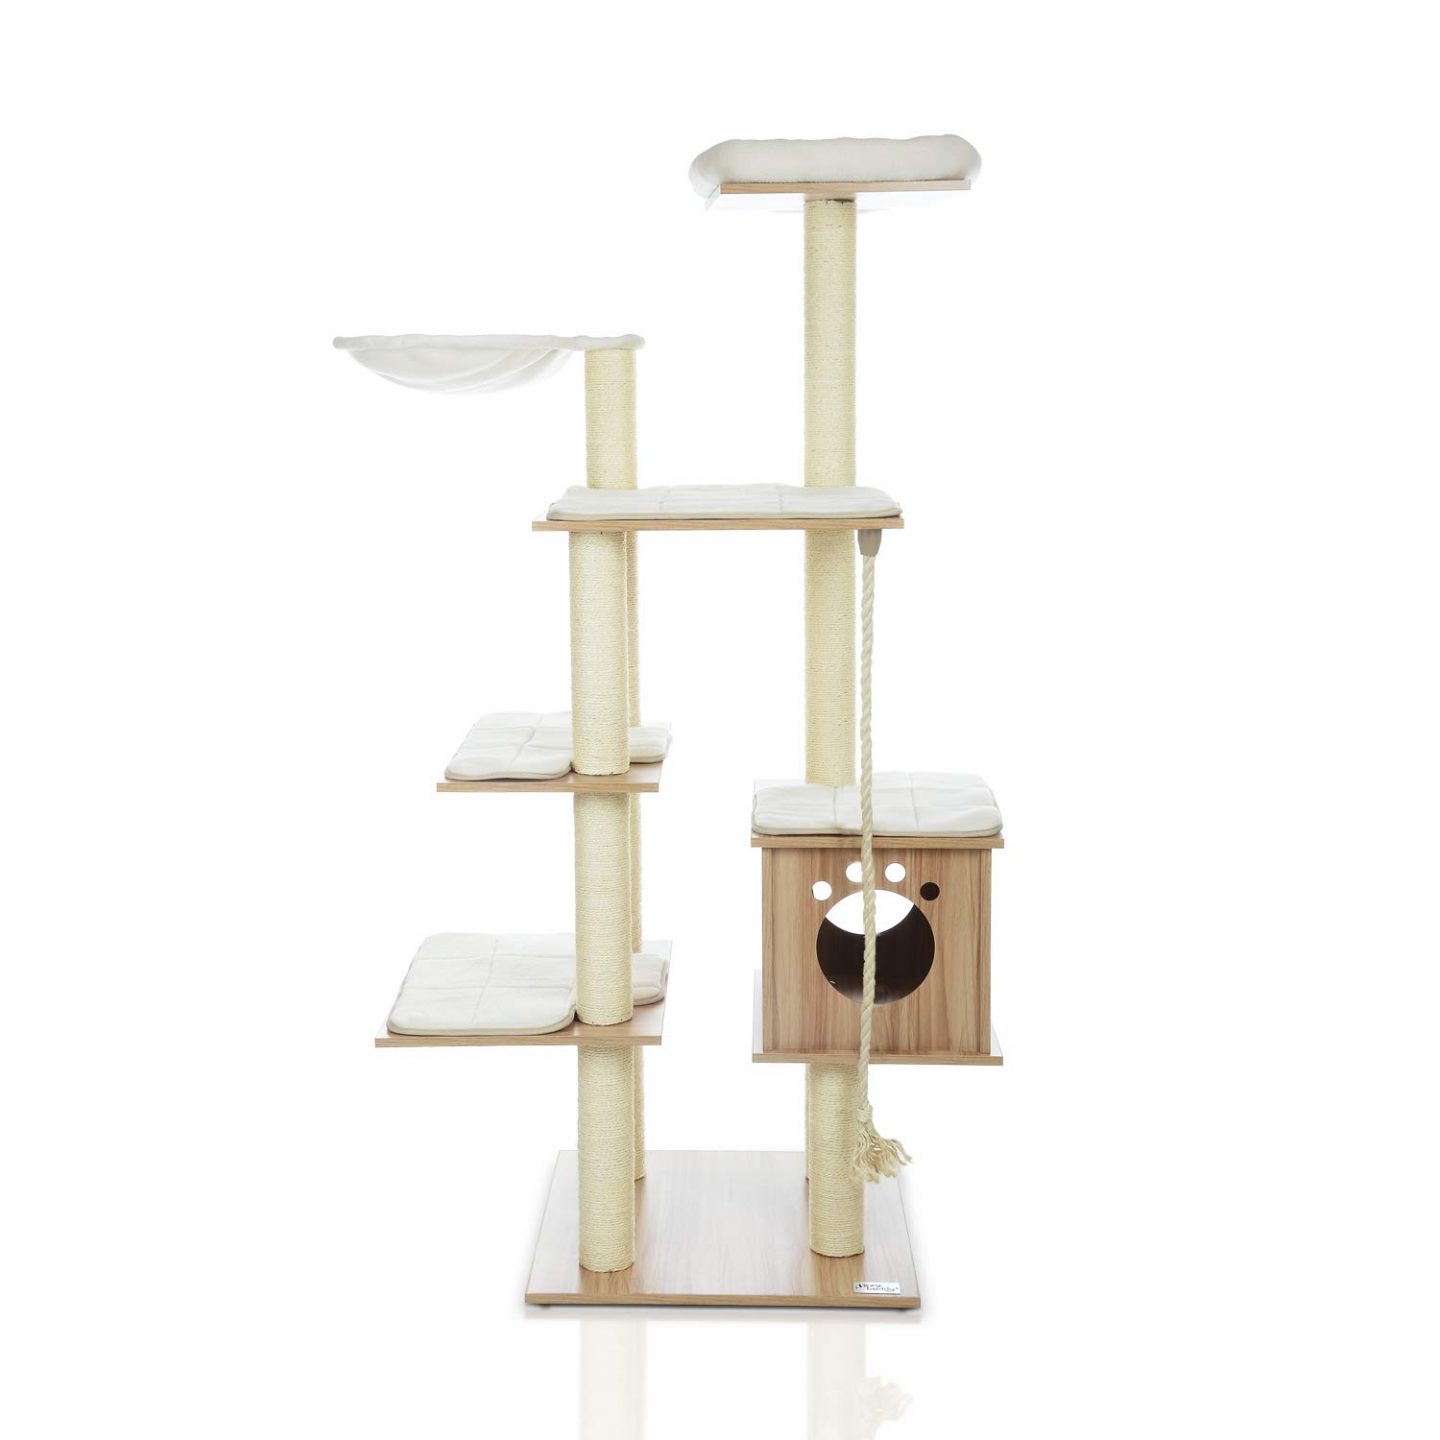 Wood Cat Tree No Carpet - Did you think wooden cat trees NO CARPET were just a dream? Think Again. This affordable model does not collect pet hair, has removable pads and is totally GEORGEOUS!